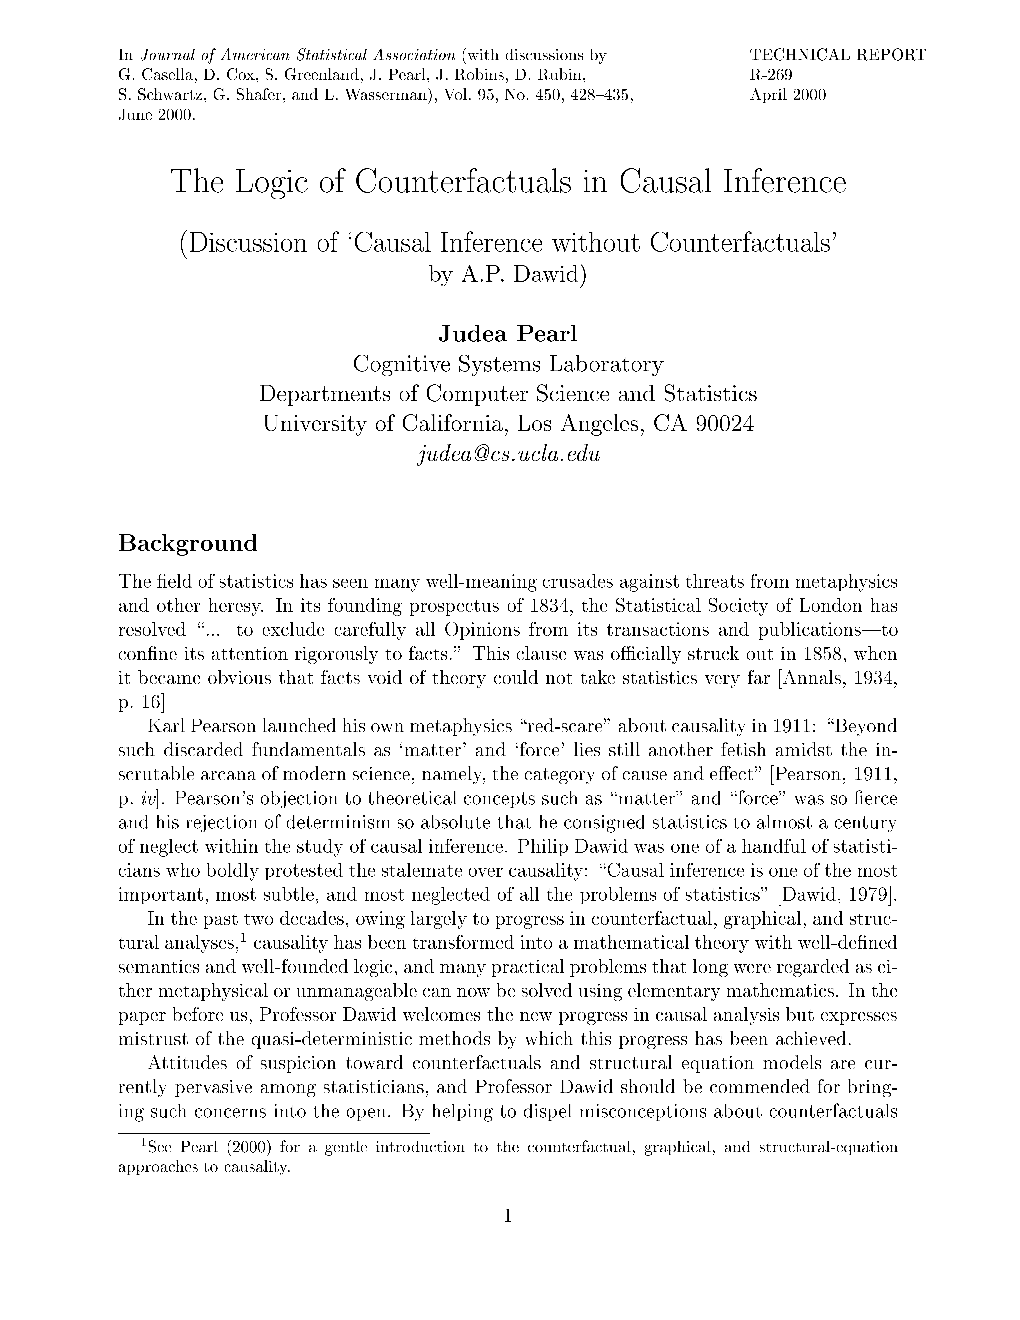 The Logic of Counterfactuals in Causal Inference